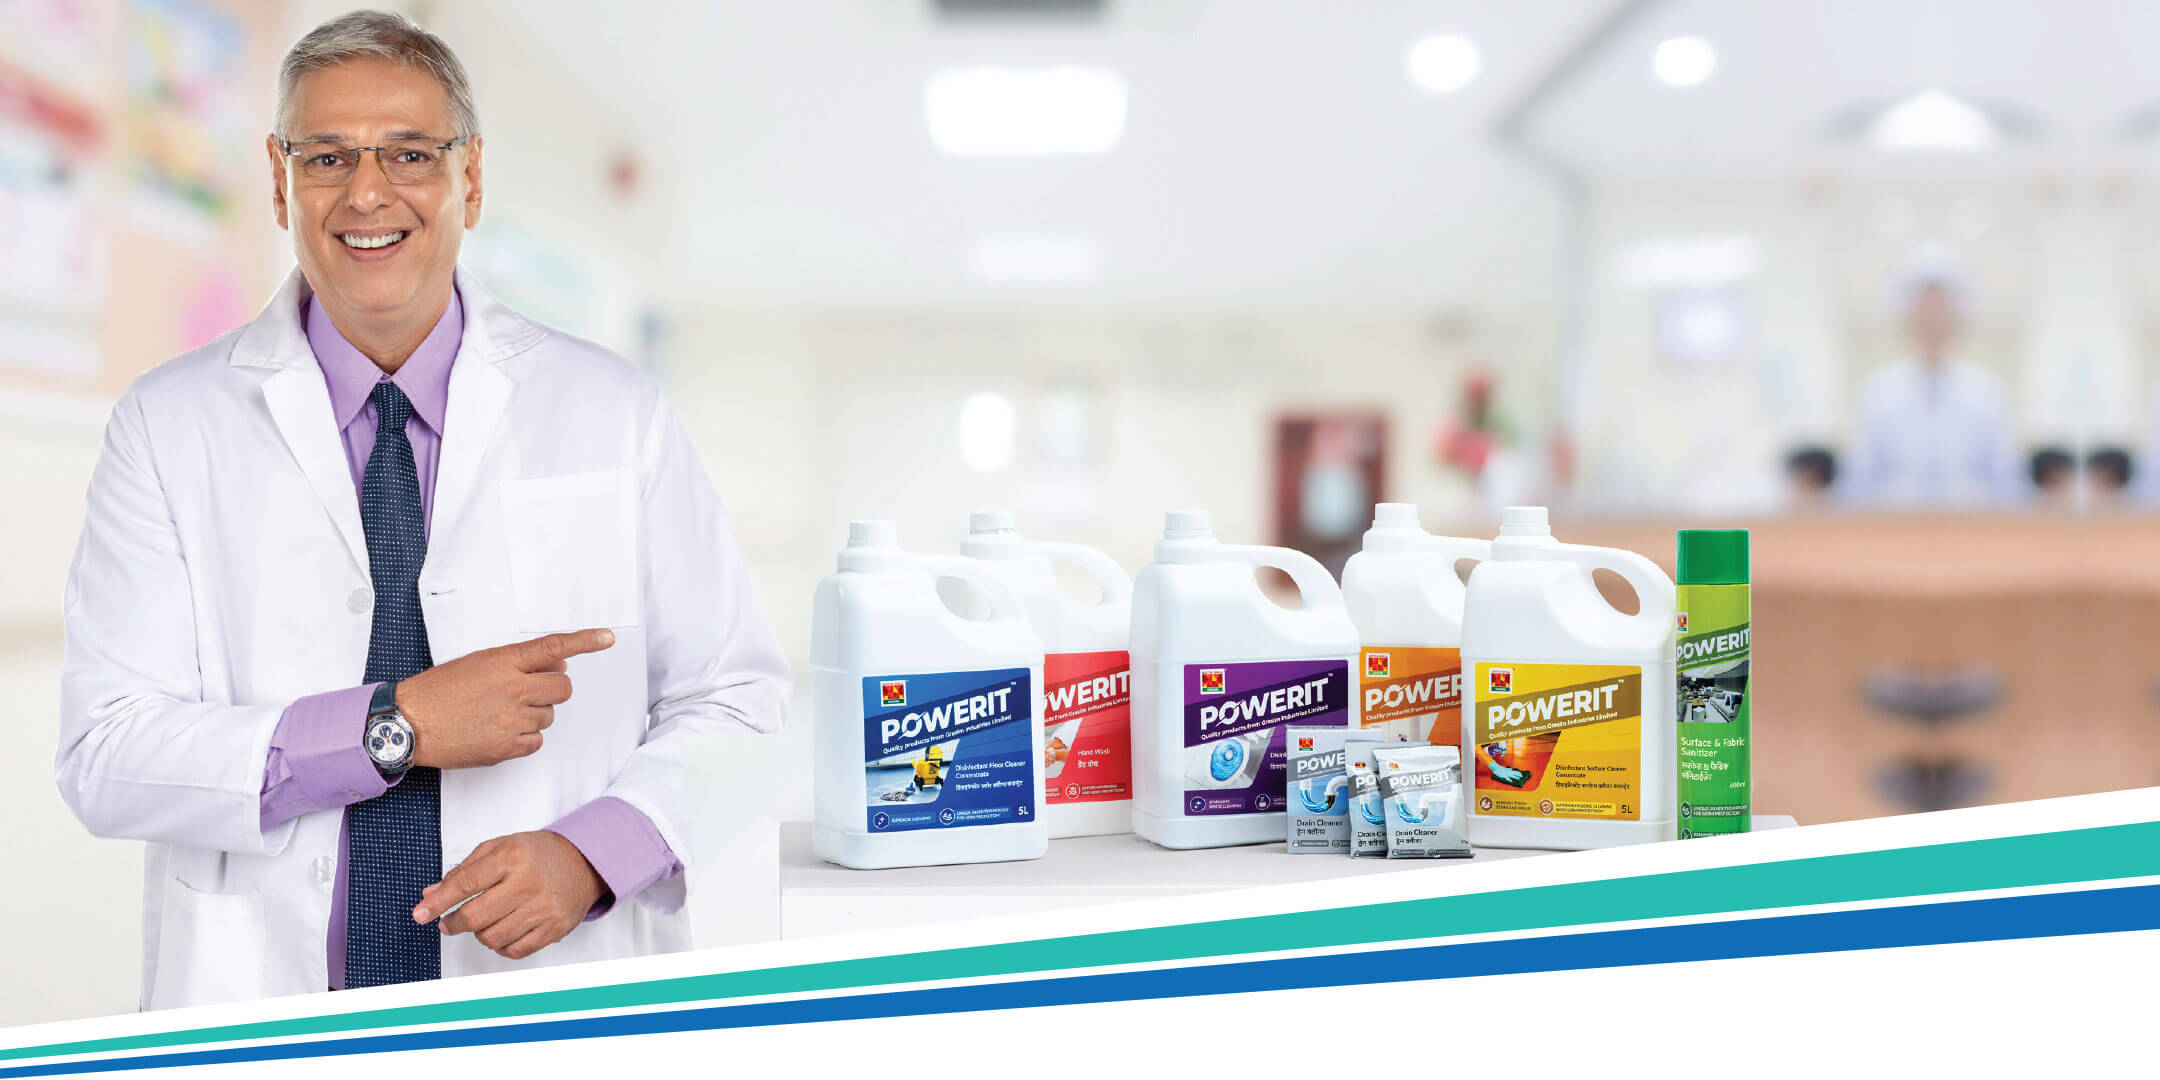 Powerit Cleaning Range endorsed by Experts - for desktop